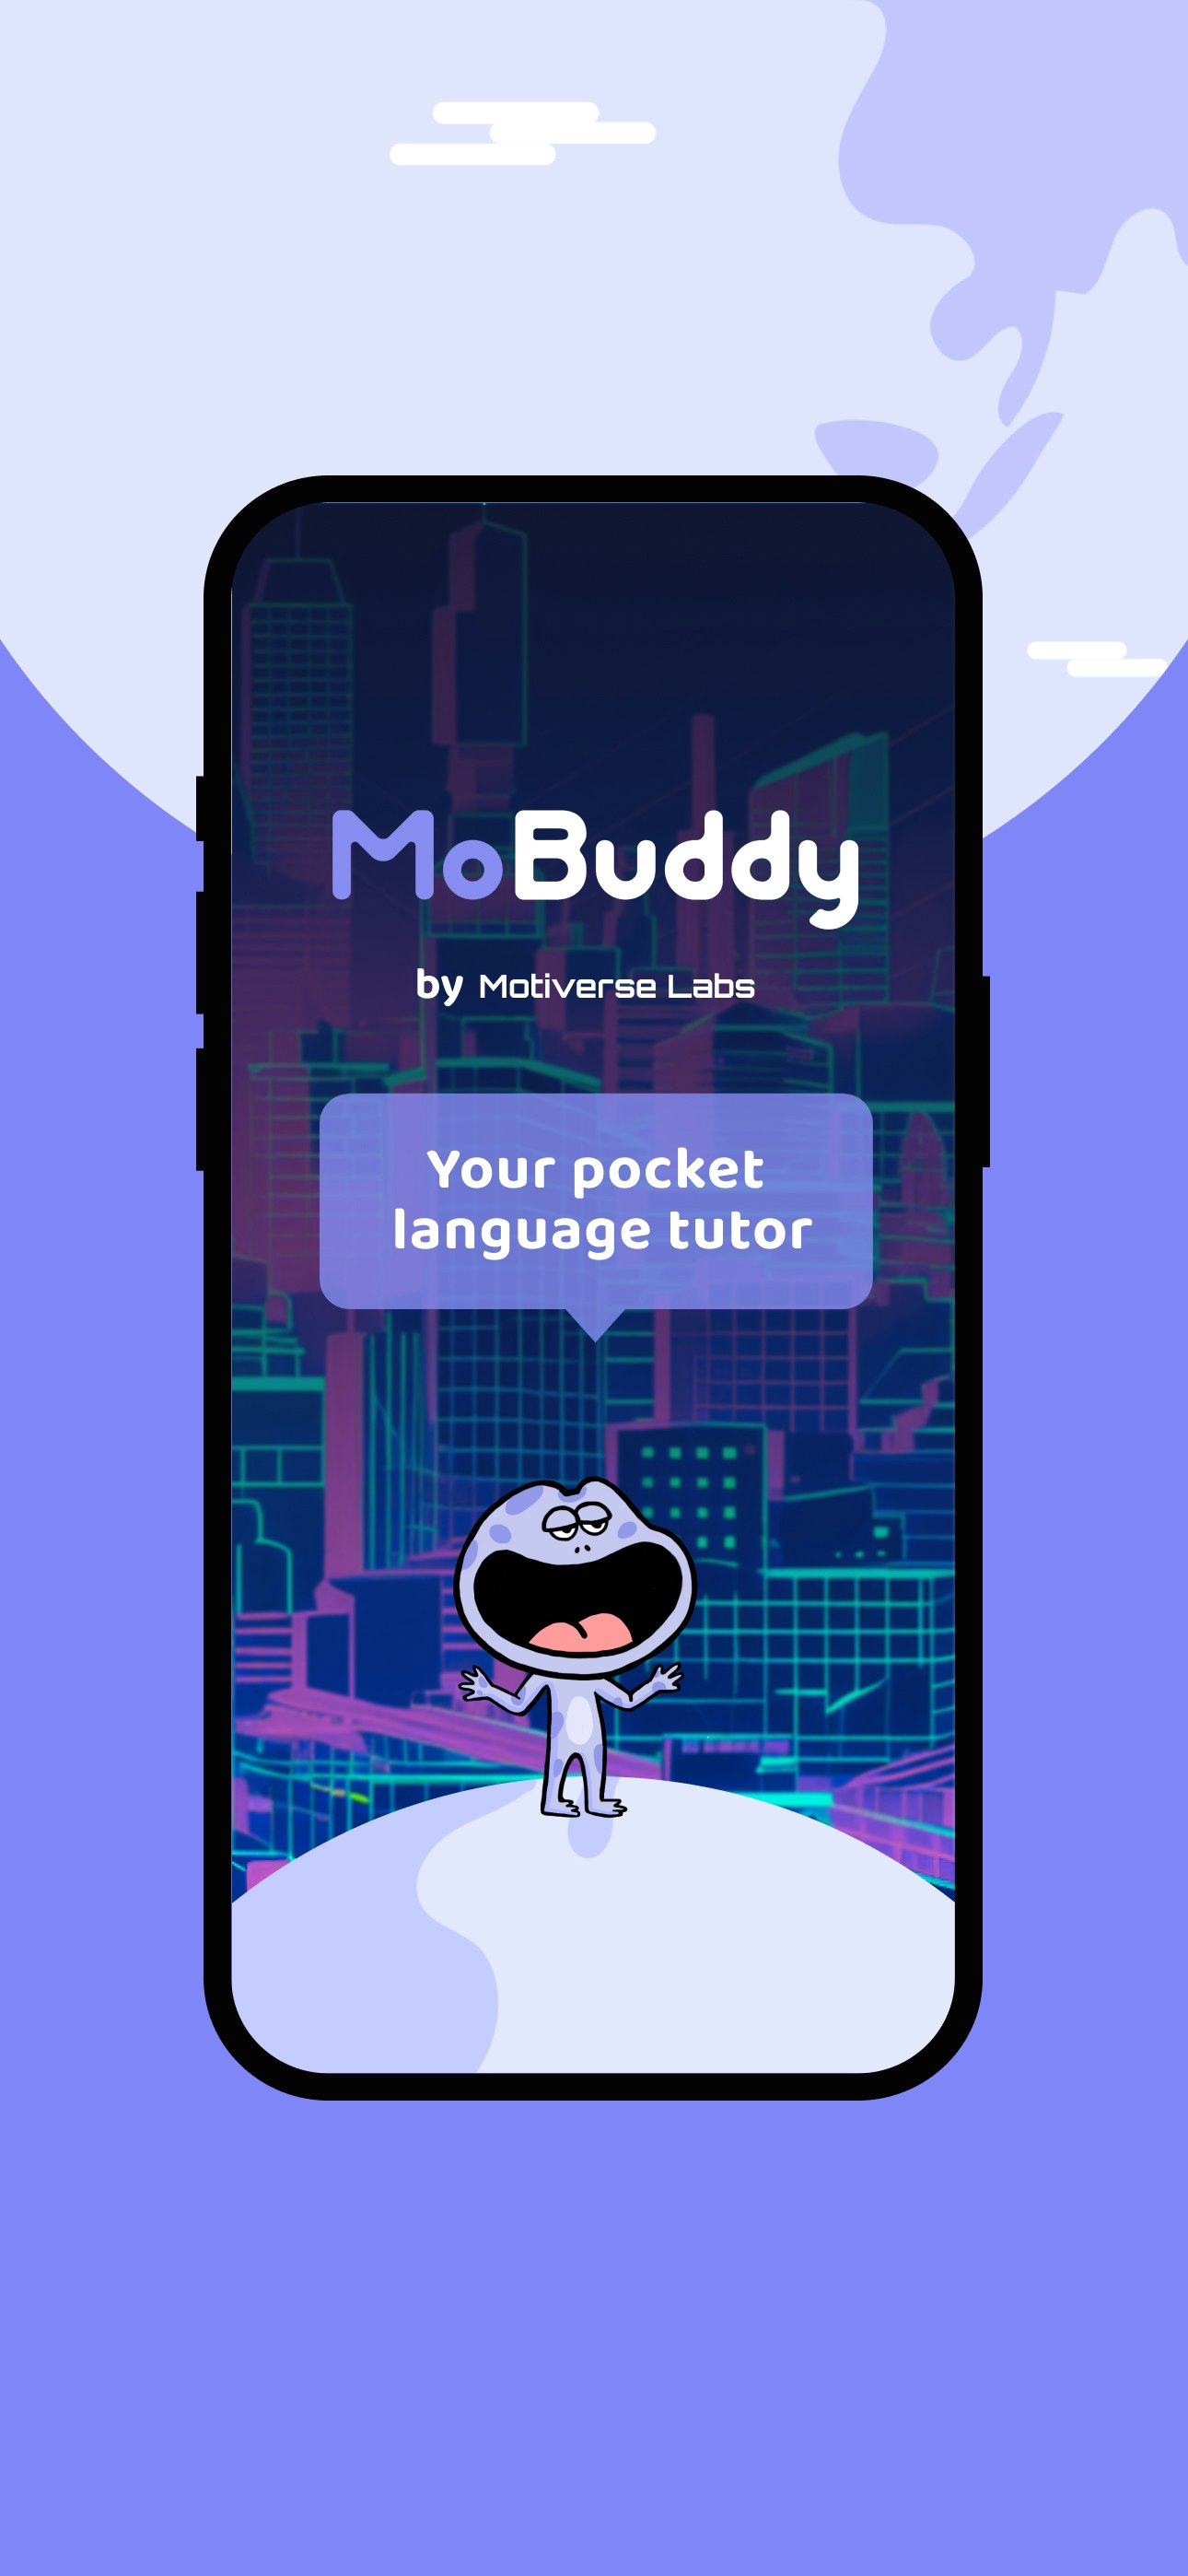 mobuddy - A language tutor in your pocket